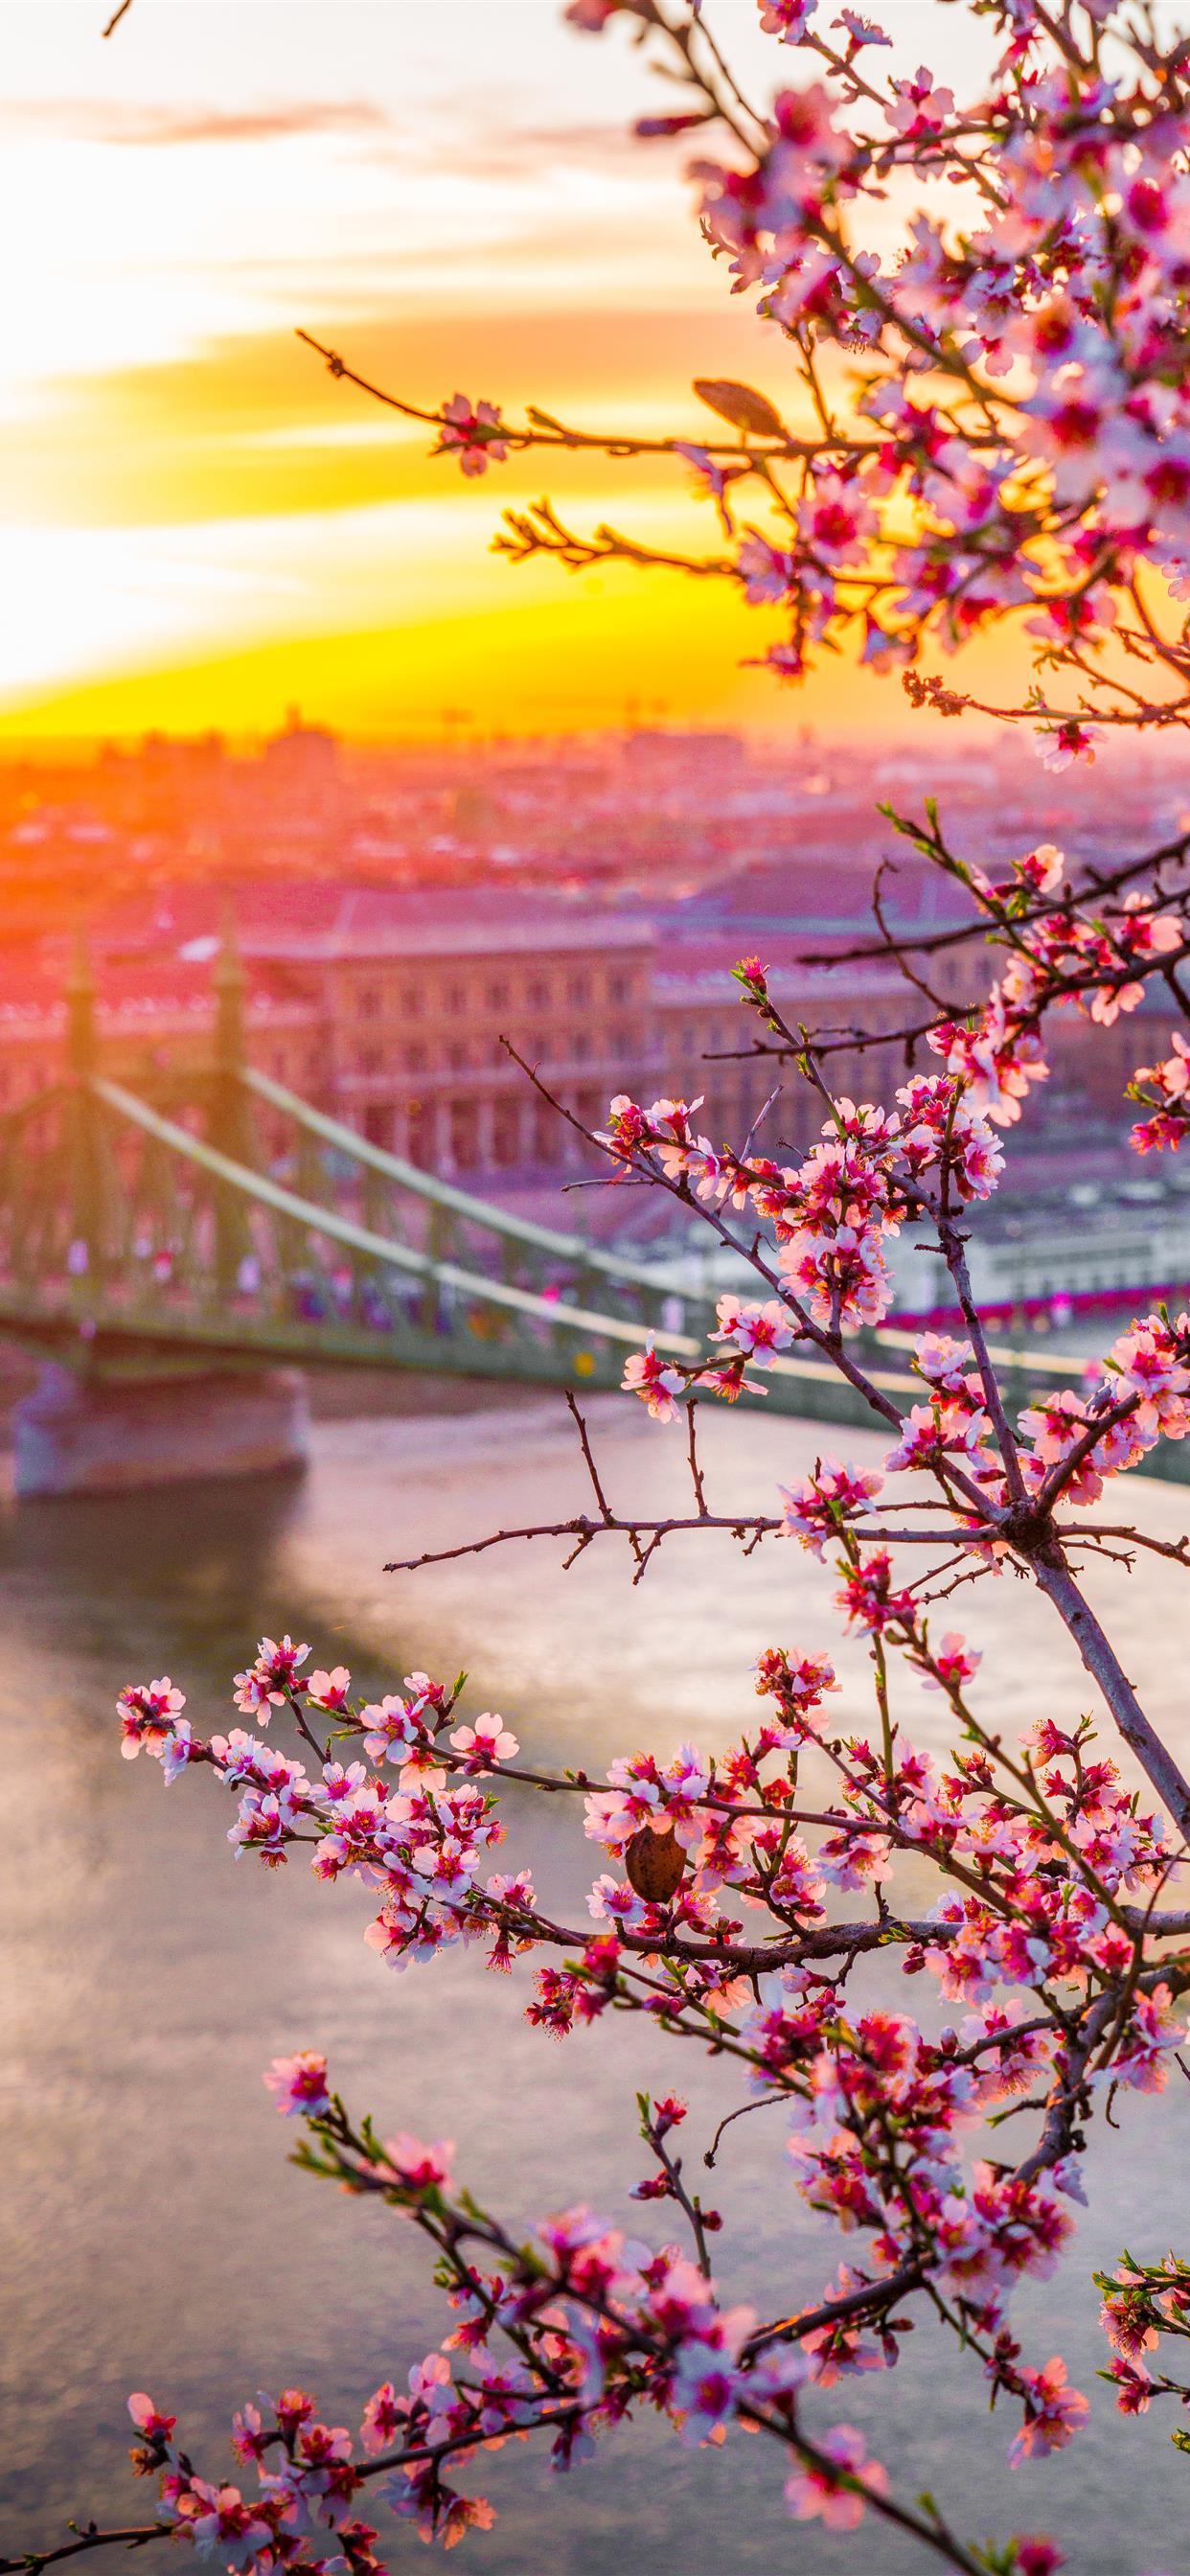 Liberty bridge in Hungary Spring edition iPhone Wallpaper Free Download